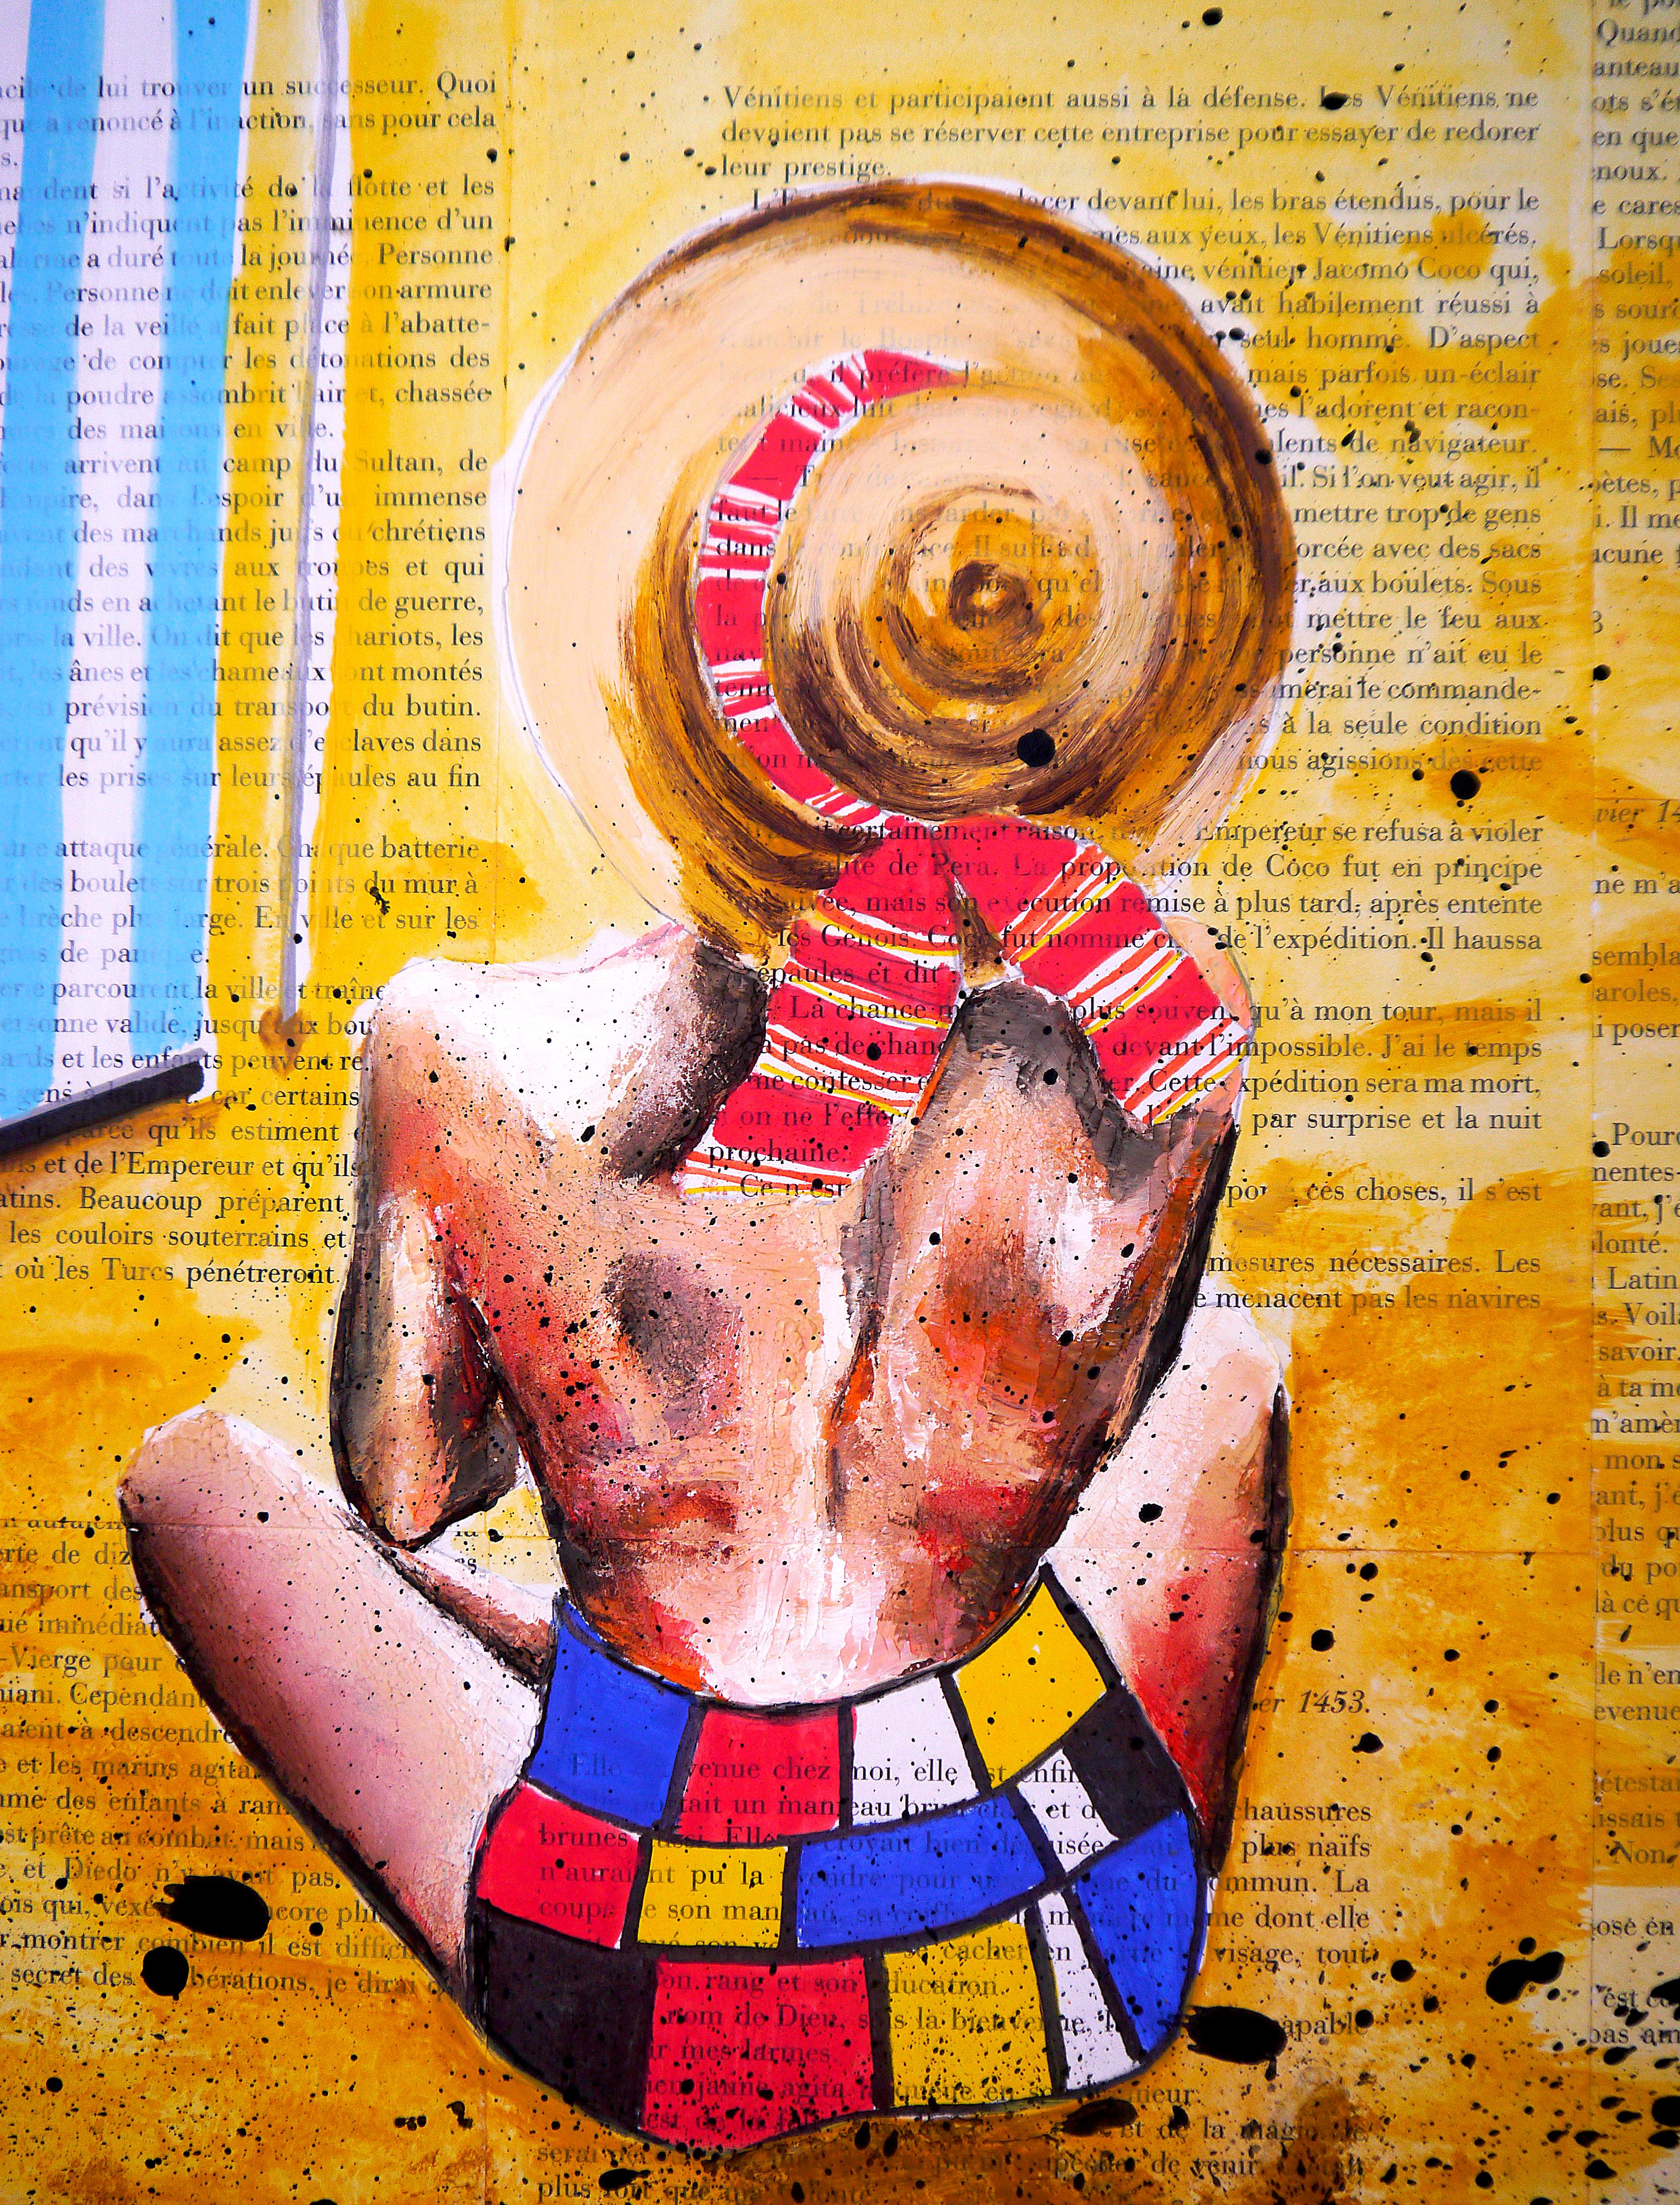 Summer in La Baule V Mondrian Swim dress

Summer Scene: Woman in La Baule V

Technique: oil, acrylic, and ink on old book pages on wooden frame 30x30cm ■■ 11,8x11,8 inch

Sustainability: Wooden frame is made by the artist by recycling  old books. In